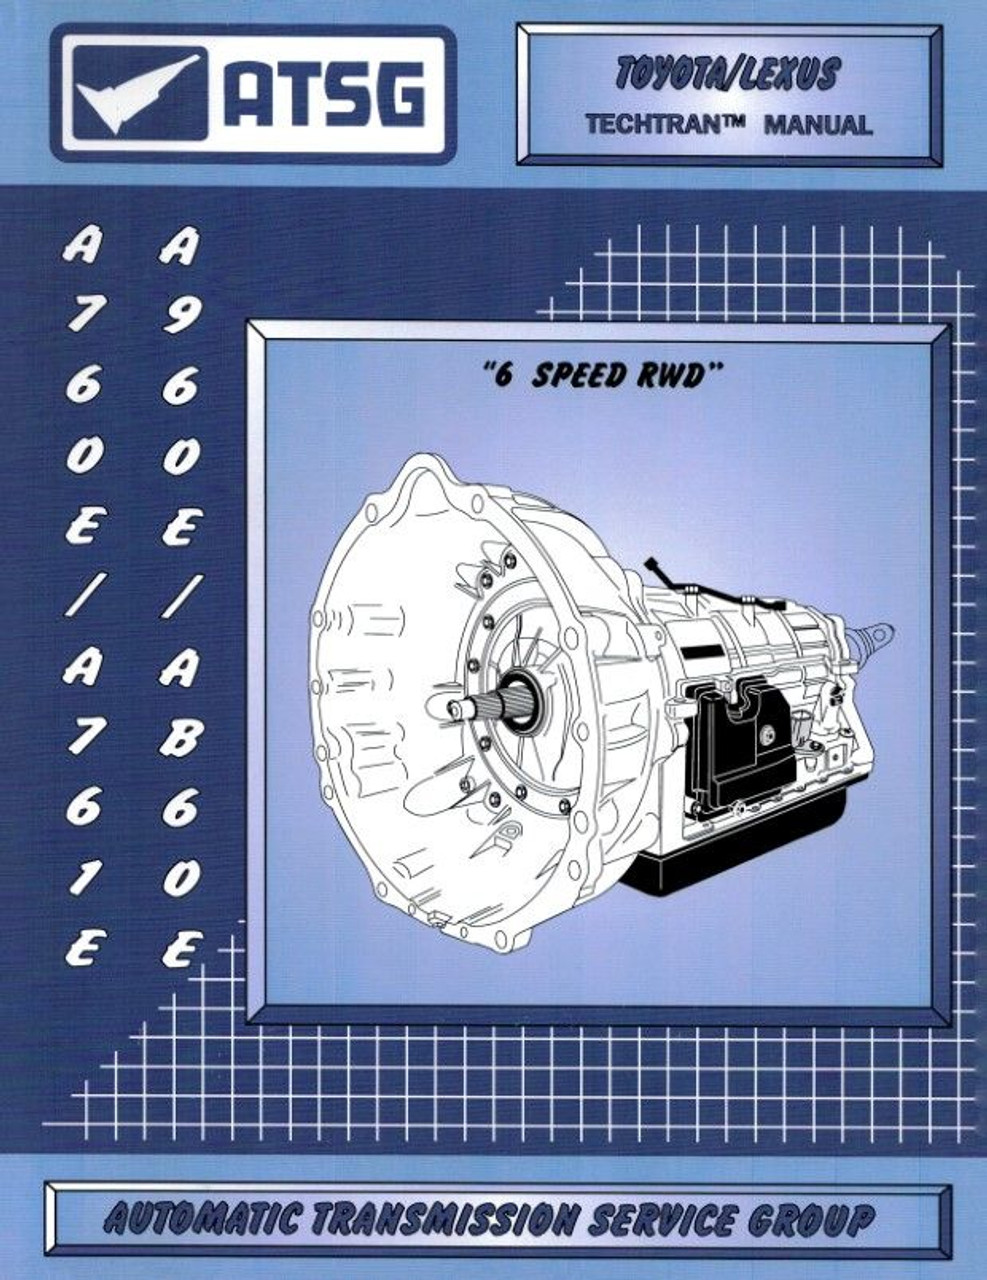 manuals for automatic transmission rebuild